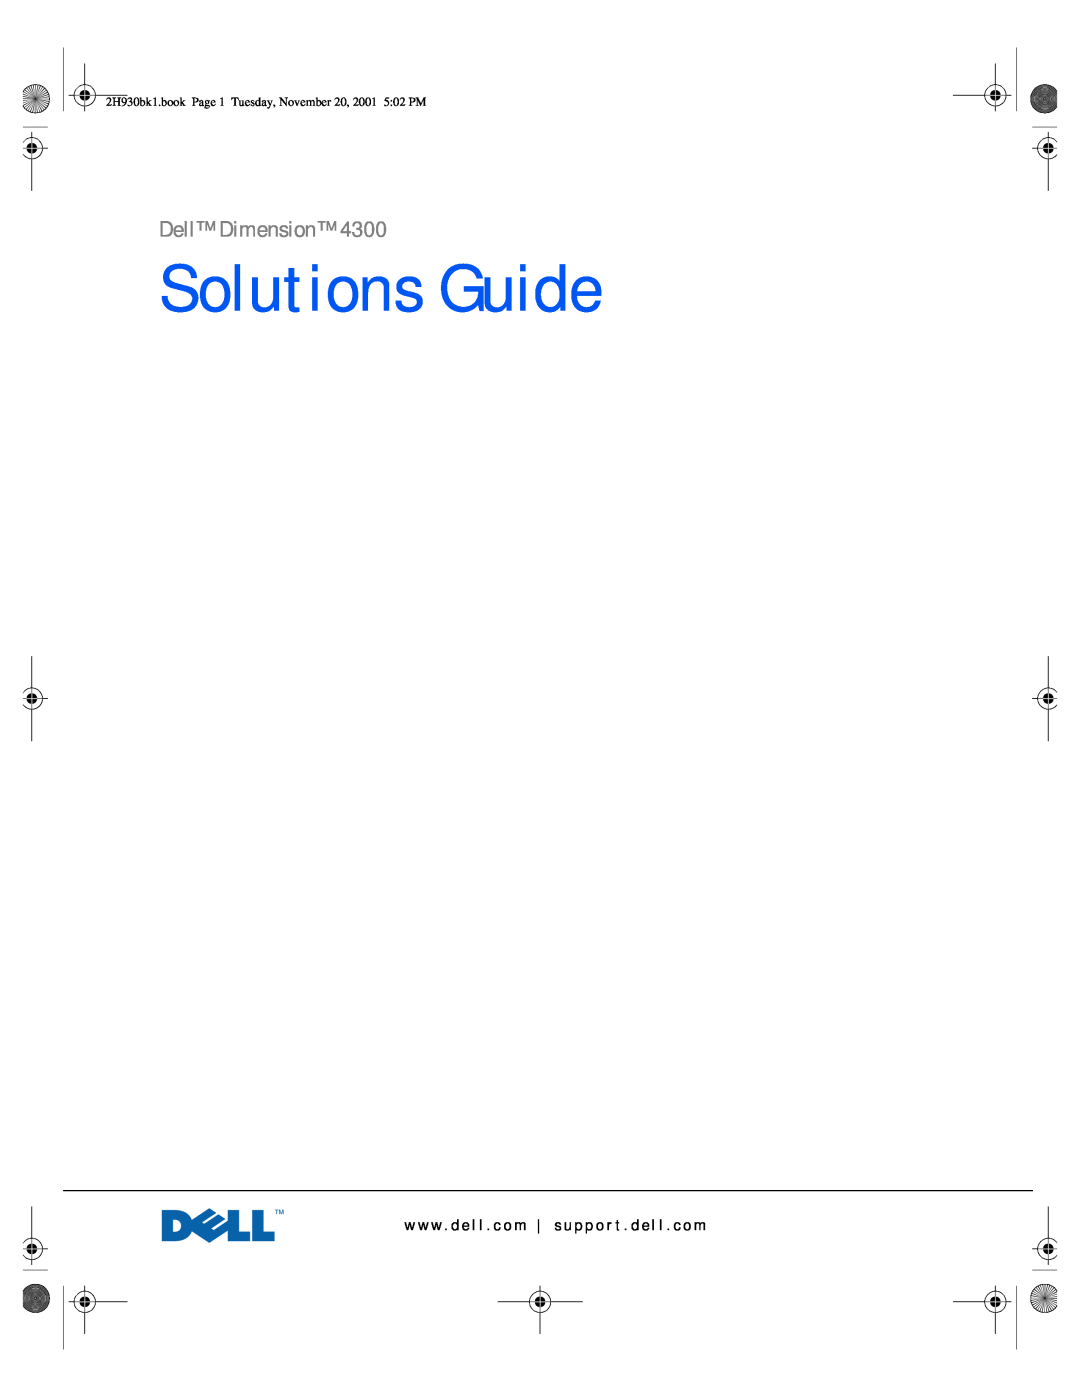 Dell 4300 manual Solutions Guide, Dell Dimension, 2H930bk1.book Page 1 Tuesday, November 20, 2001 502 PM 